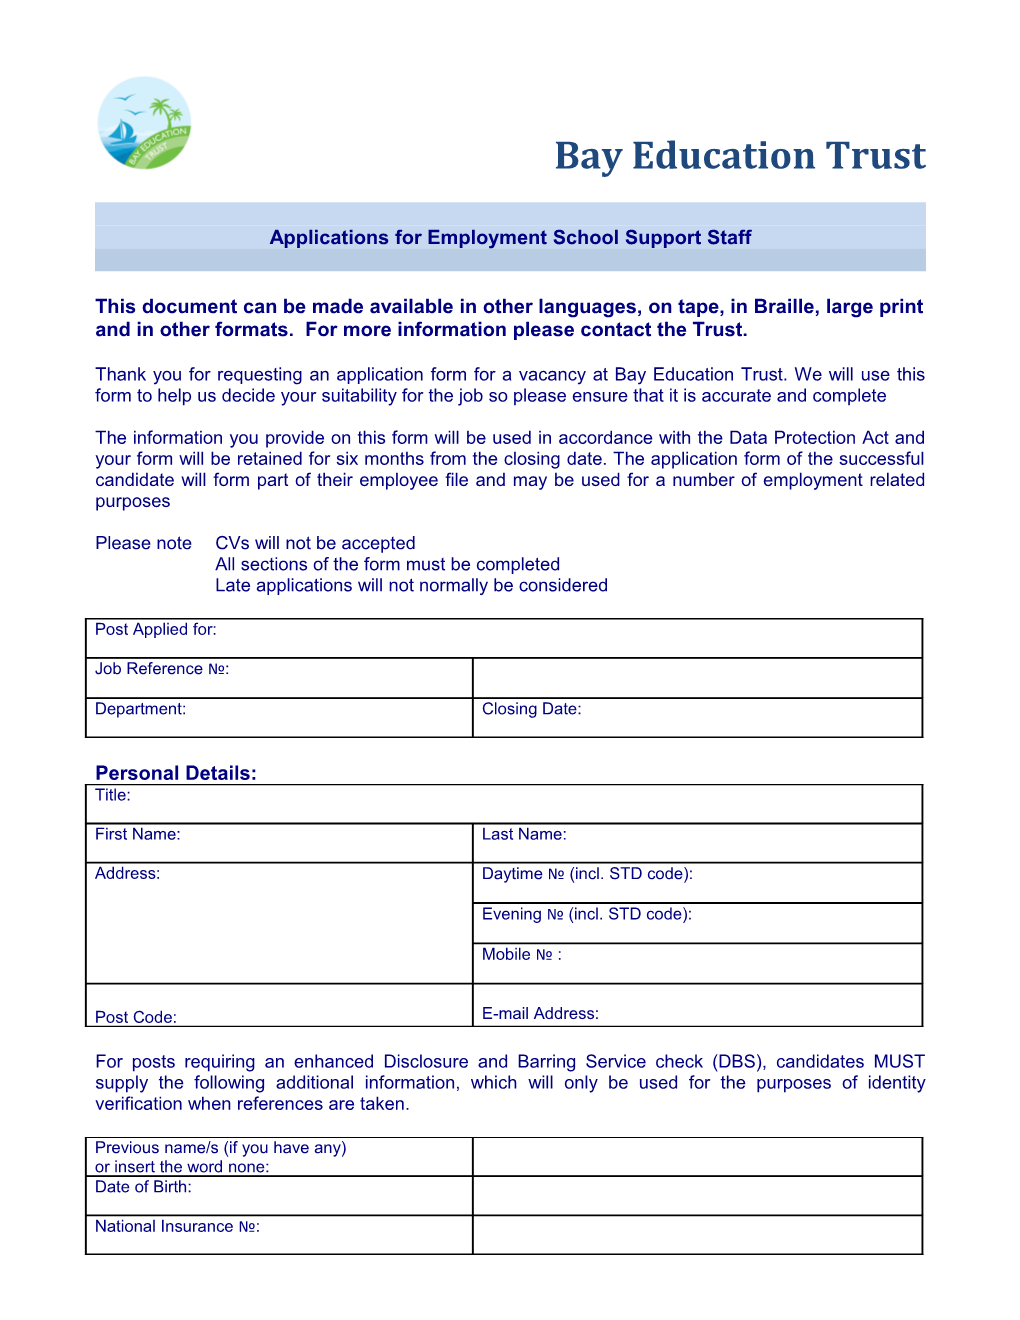 Applications for Employment School Support Staff